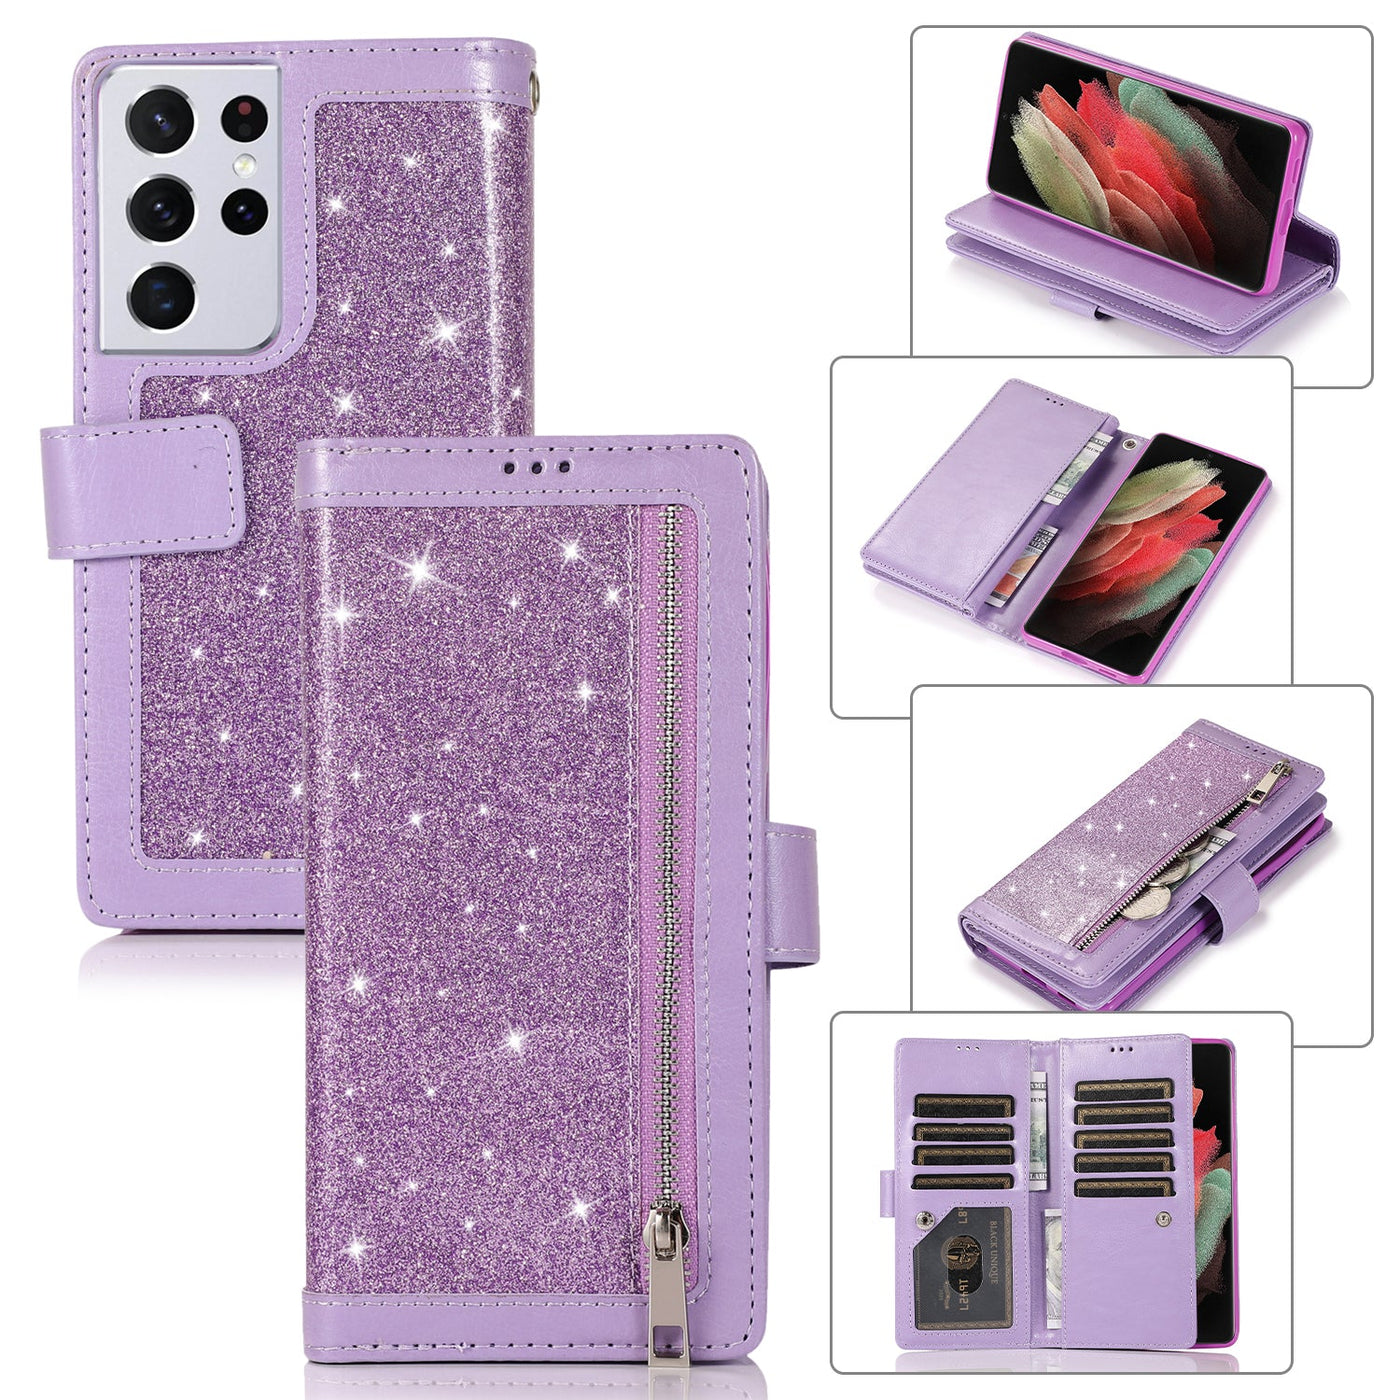 Samsung Galaxy S23 Ultra Premium Leather Glitter Wallet Flip Case Cover | Trifold Purse Clutch By Excelsior